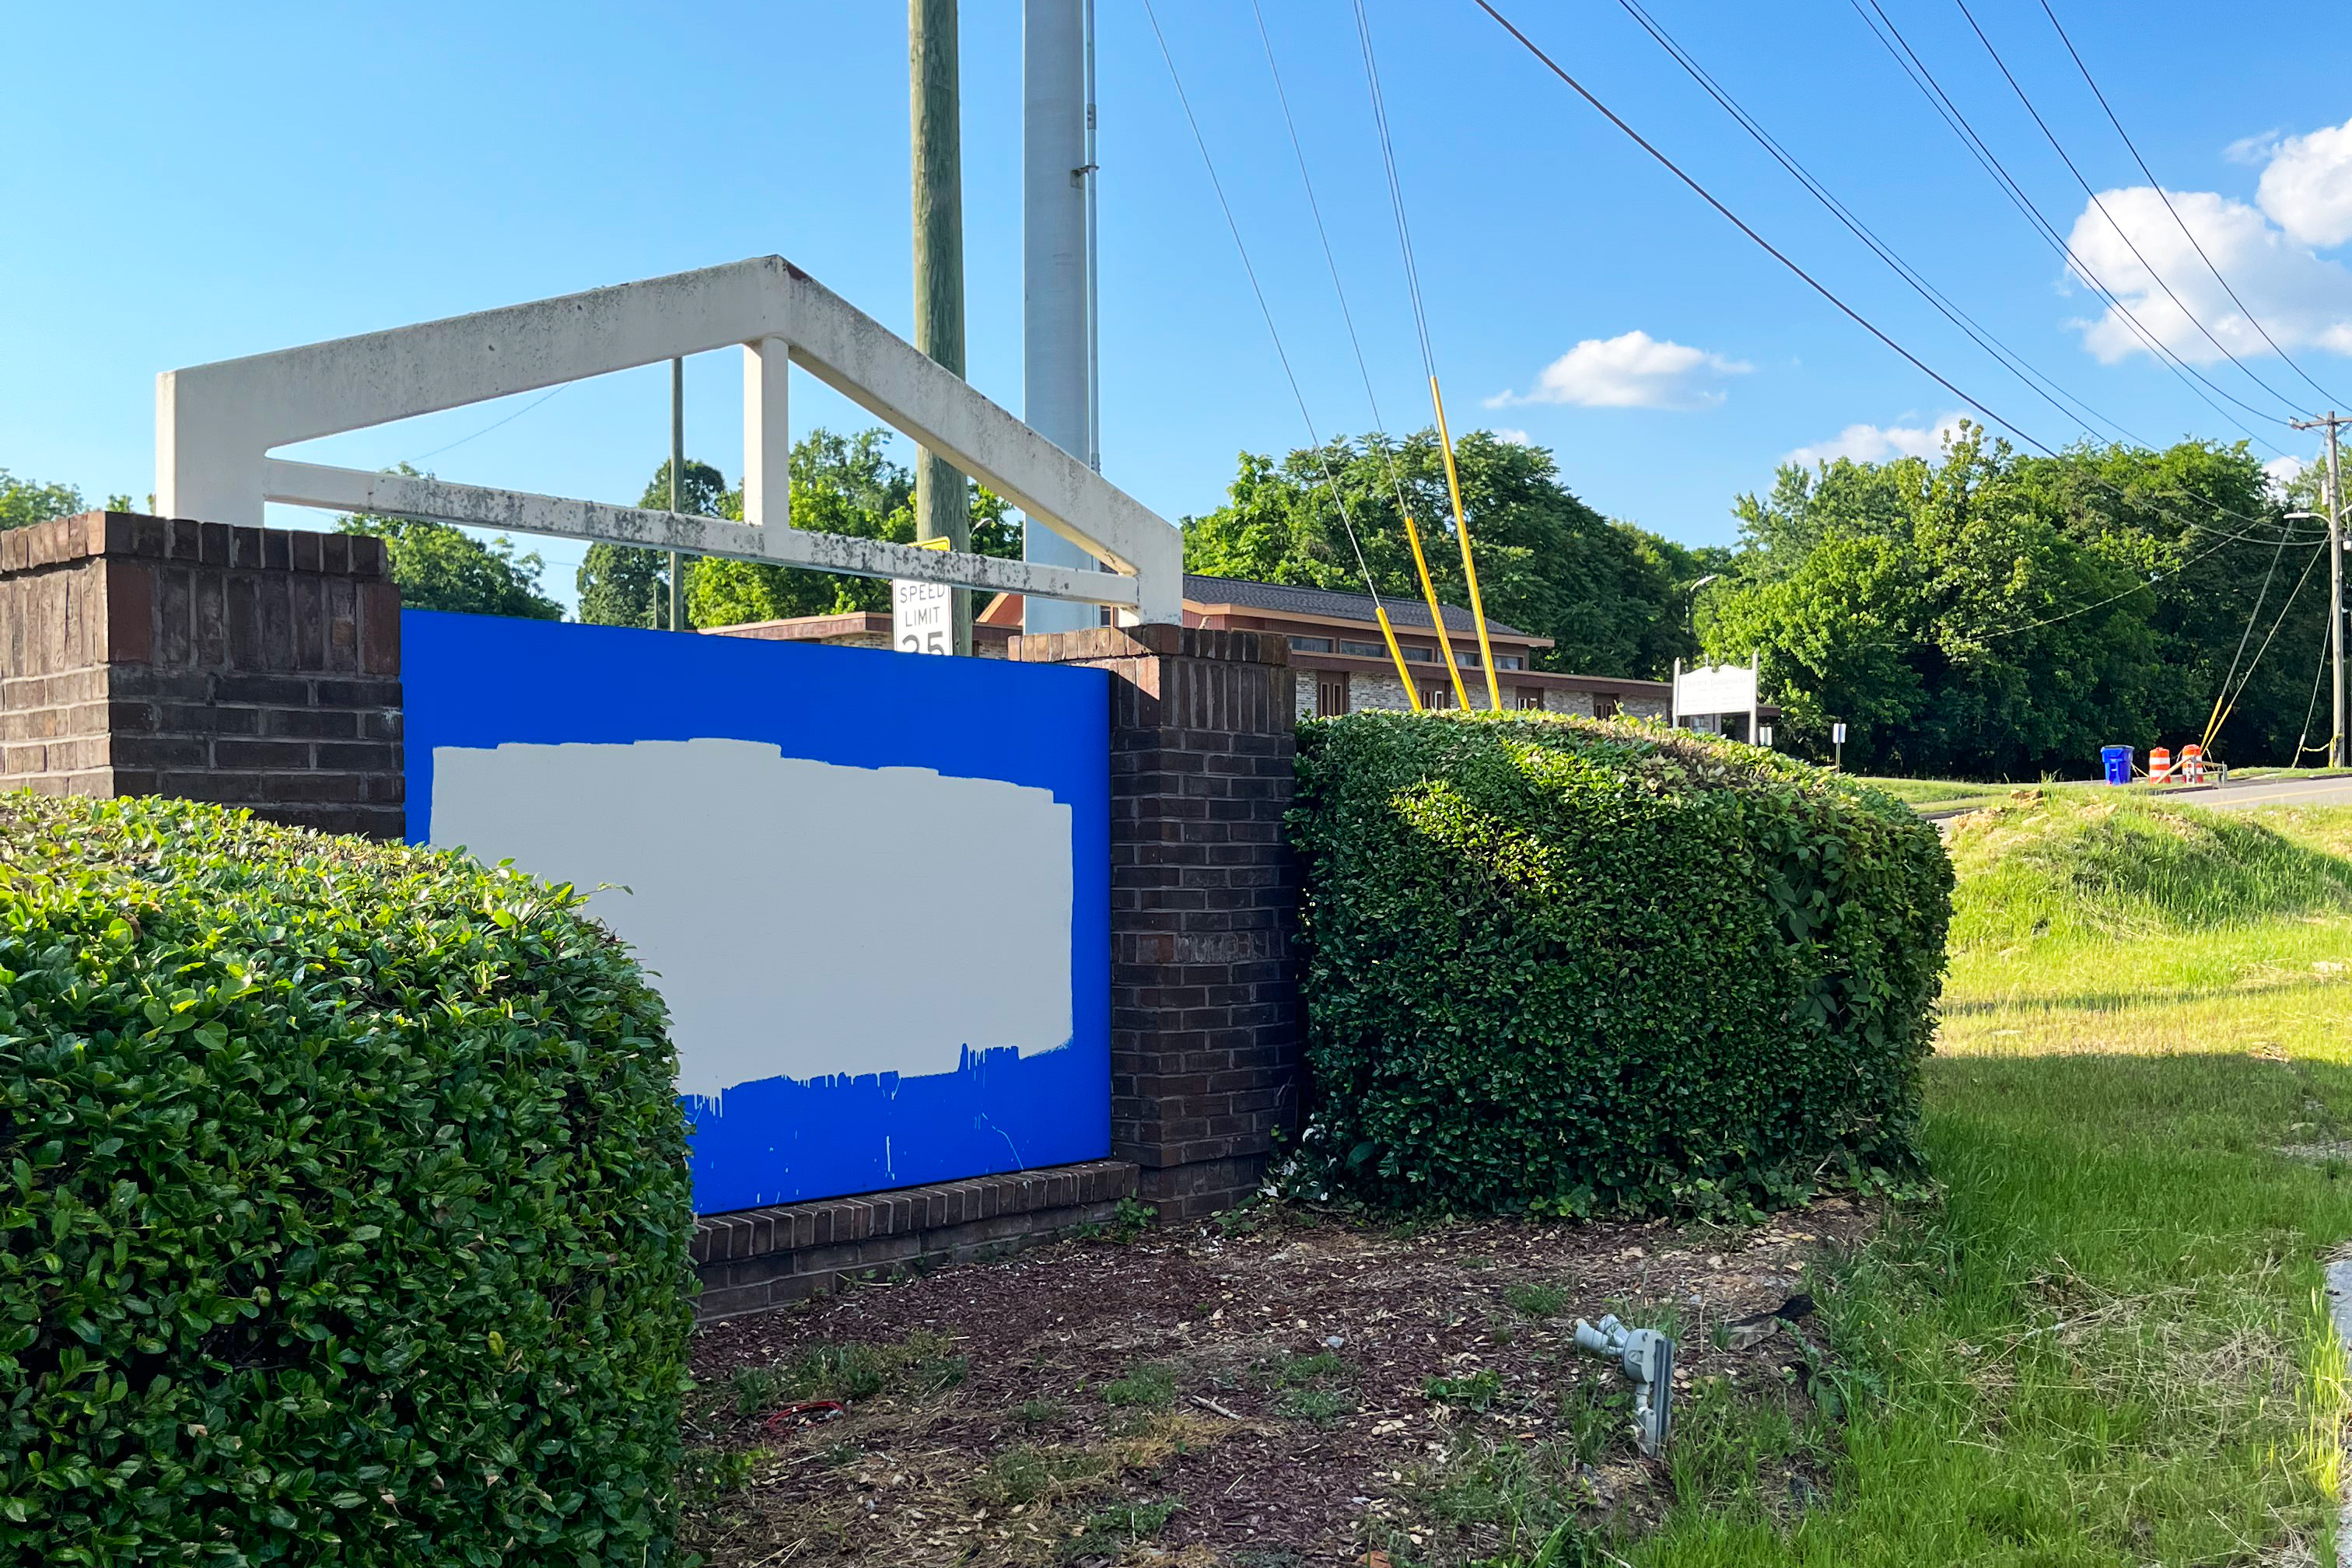 A photo shows the vandalized sign outside of the site where the Knoxville Planned Parenthood clinic stood. White paint covers a section of the sign.